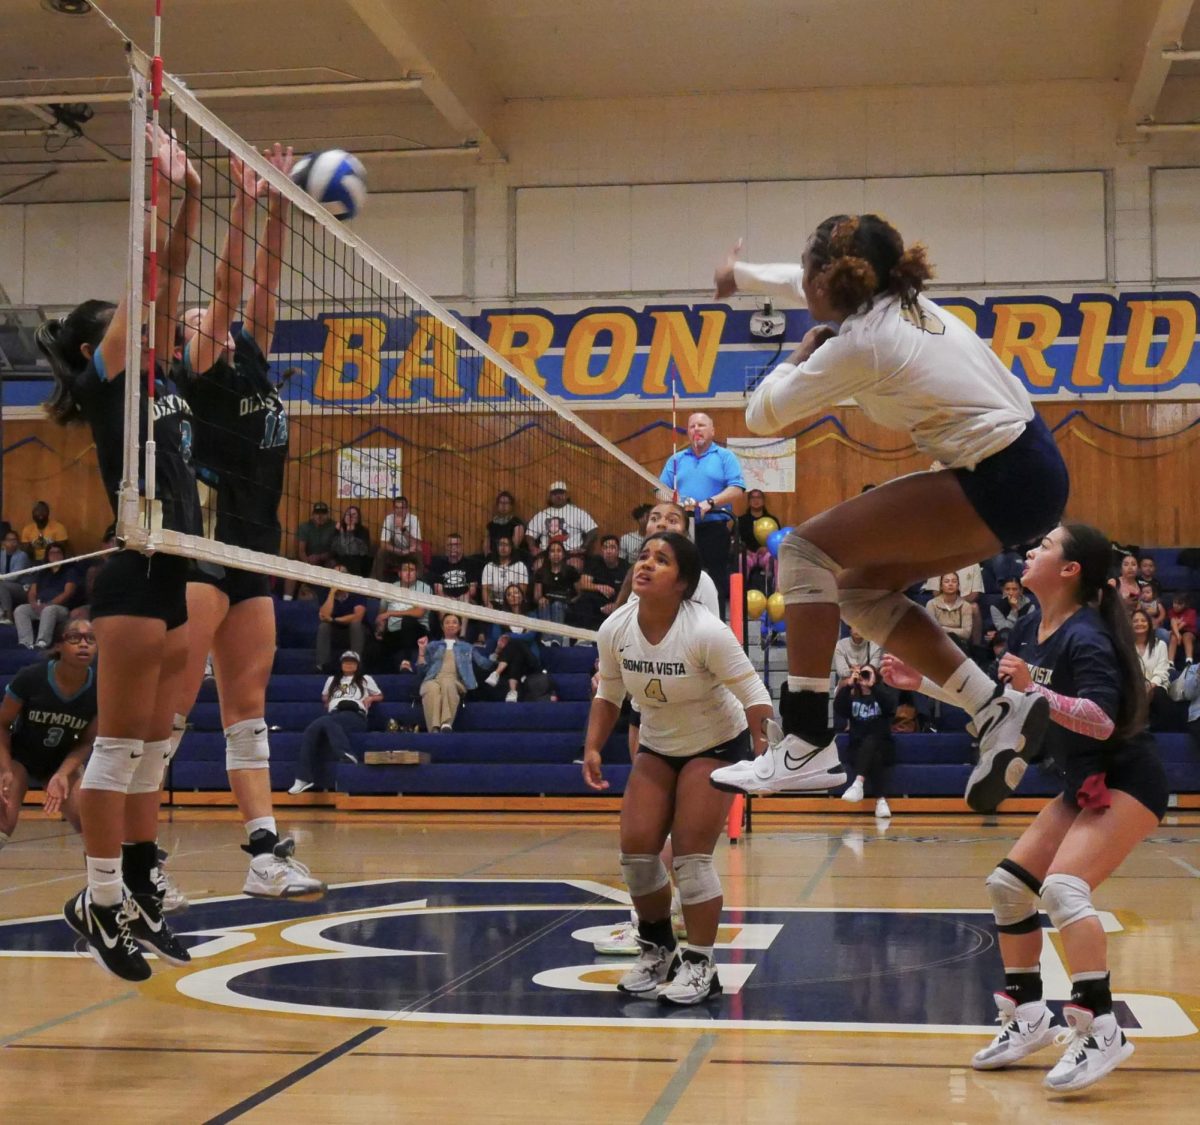 On Oct. 18, the Bonita Vista High (BVH) girls’ varsity volleyball team dominated in the mid and late stages of their 3-1 victory over Olympian High School (OHS). In the first set of the game, which BVH would end up losing, outside hitter, defensive specialist and junior Anay’Ja Ayres (6) captures the attention of her teammates as she swiftly contorts her body while spiking the ball into OHS territory.